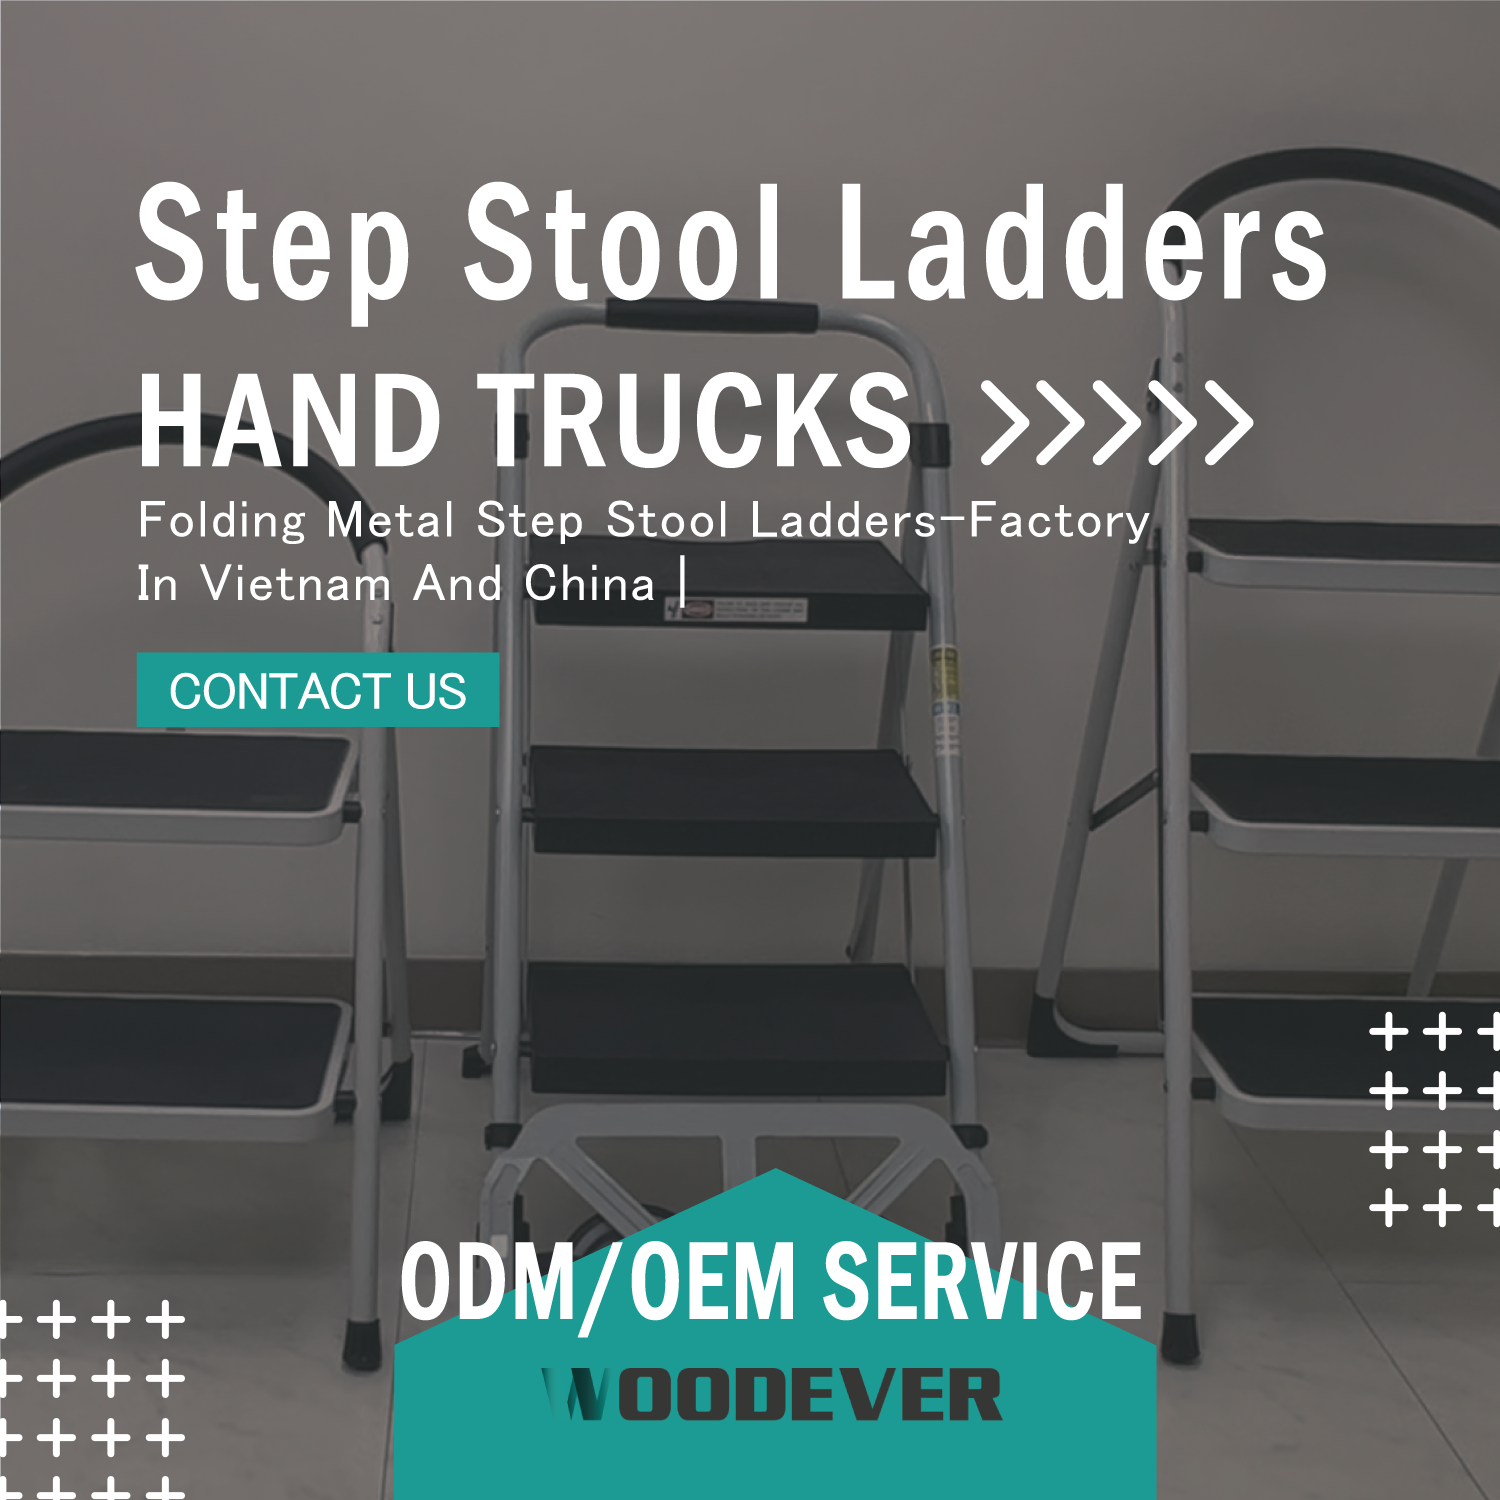 Light-weight and heavy-duty folding step stool ladders for kitchen, household, or commercial use.